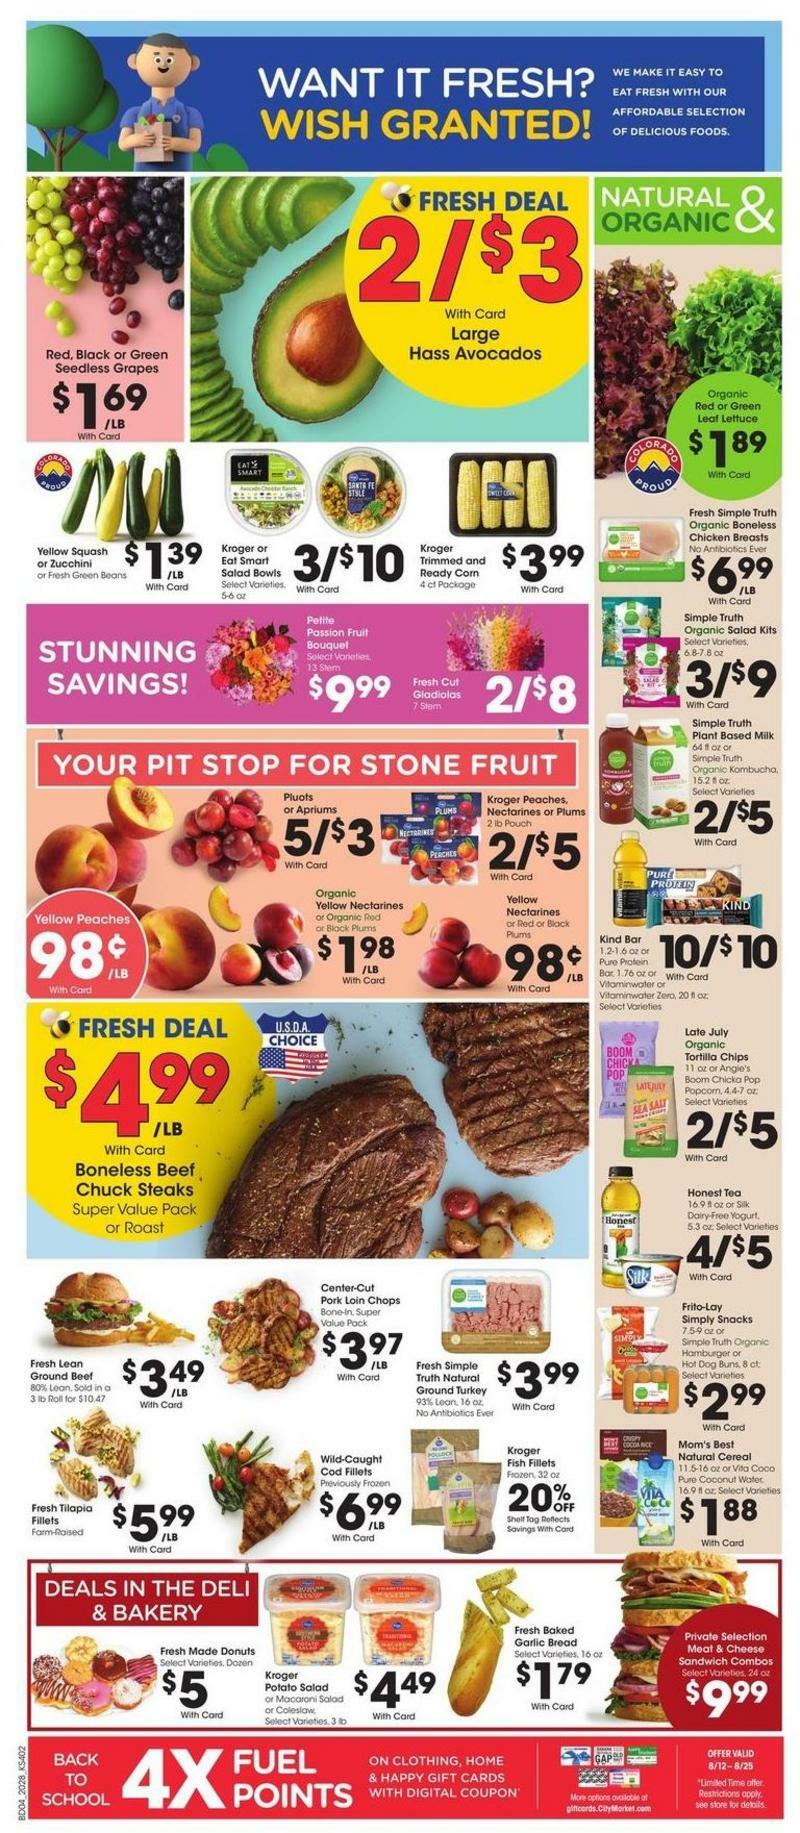 City Market Weekly Ad from August 12